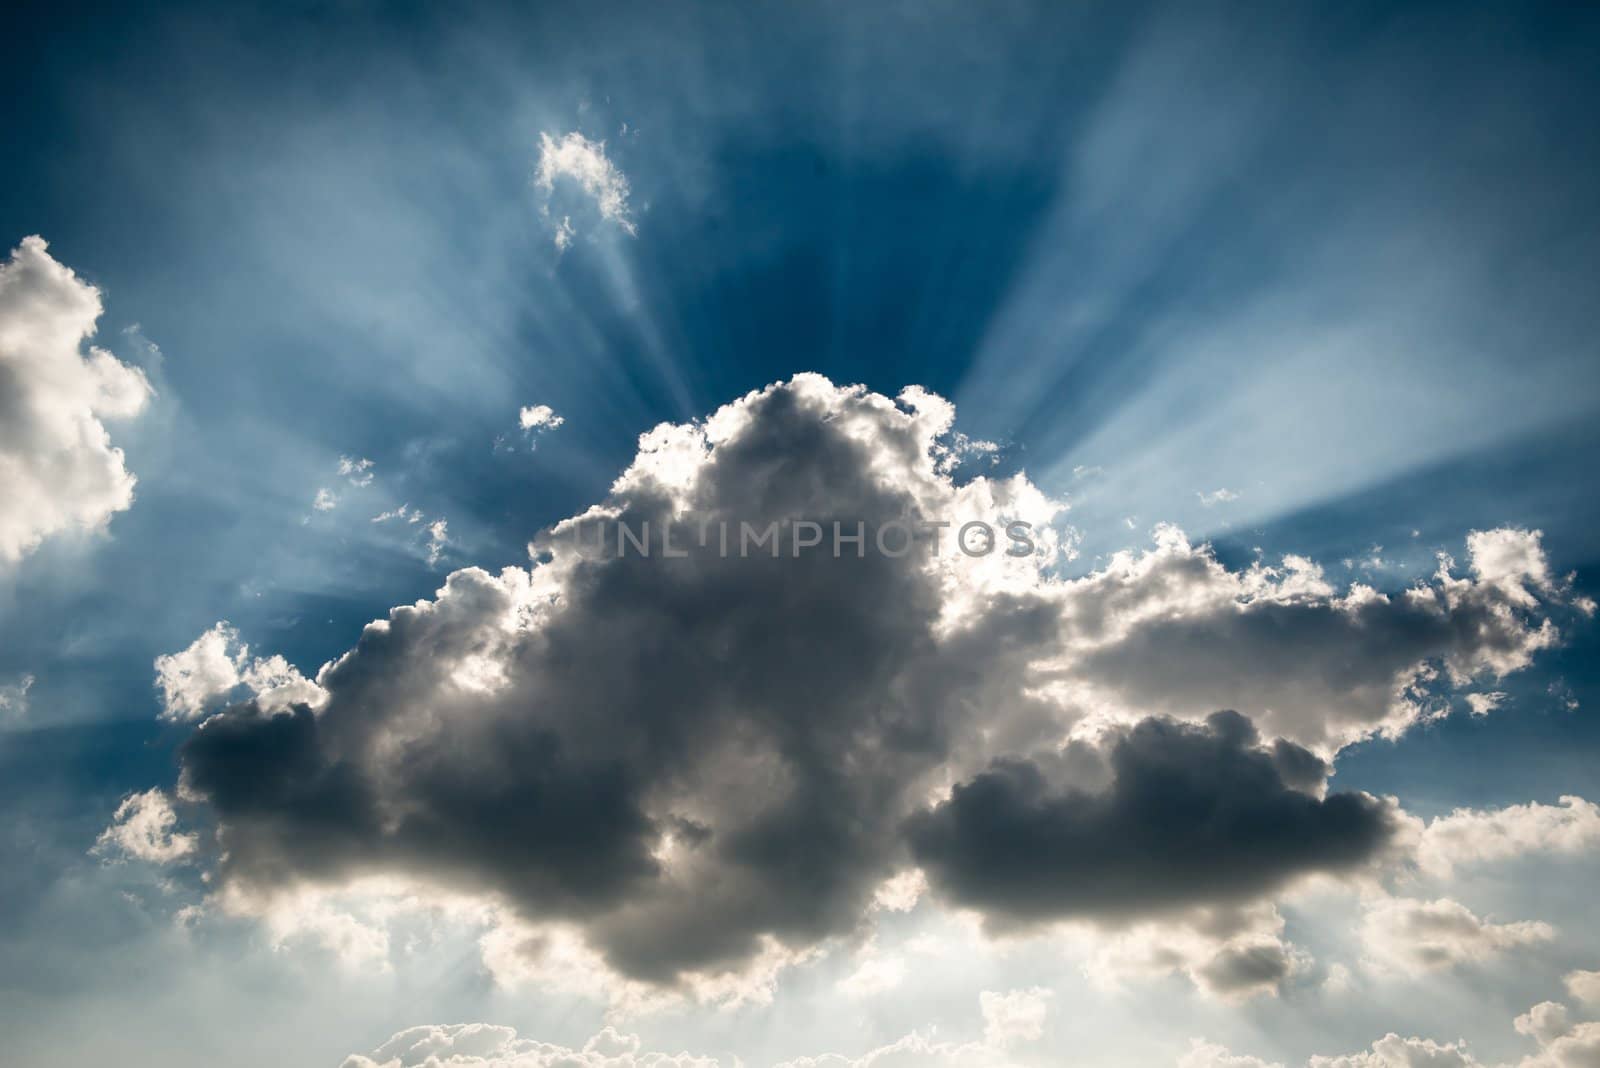 A storm grey cloud blocking the sun, giving the ray of light at the background